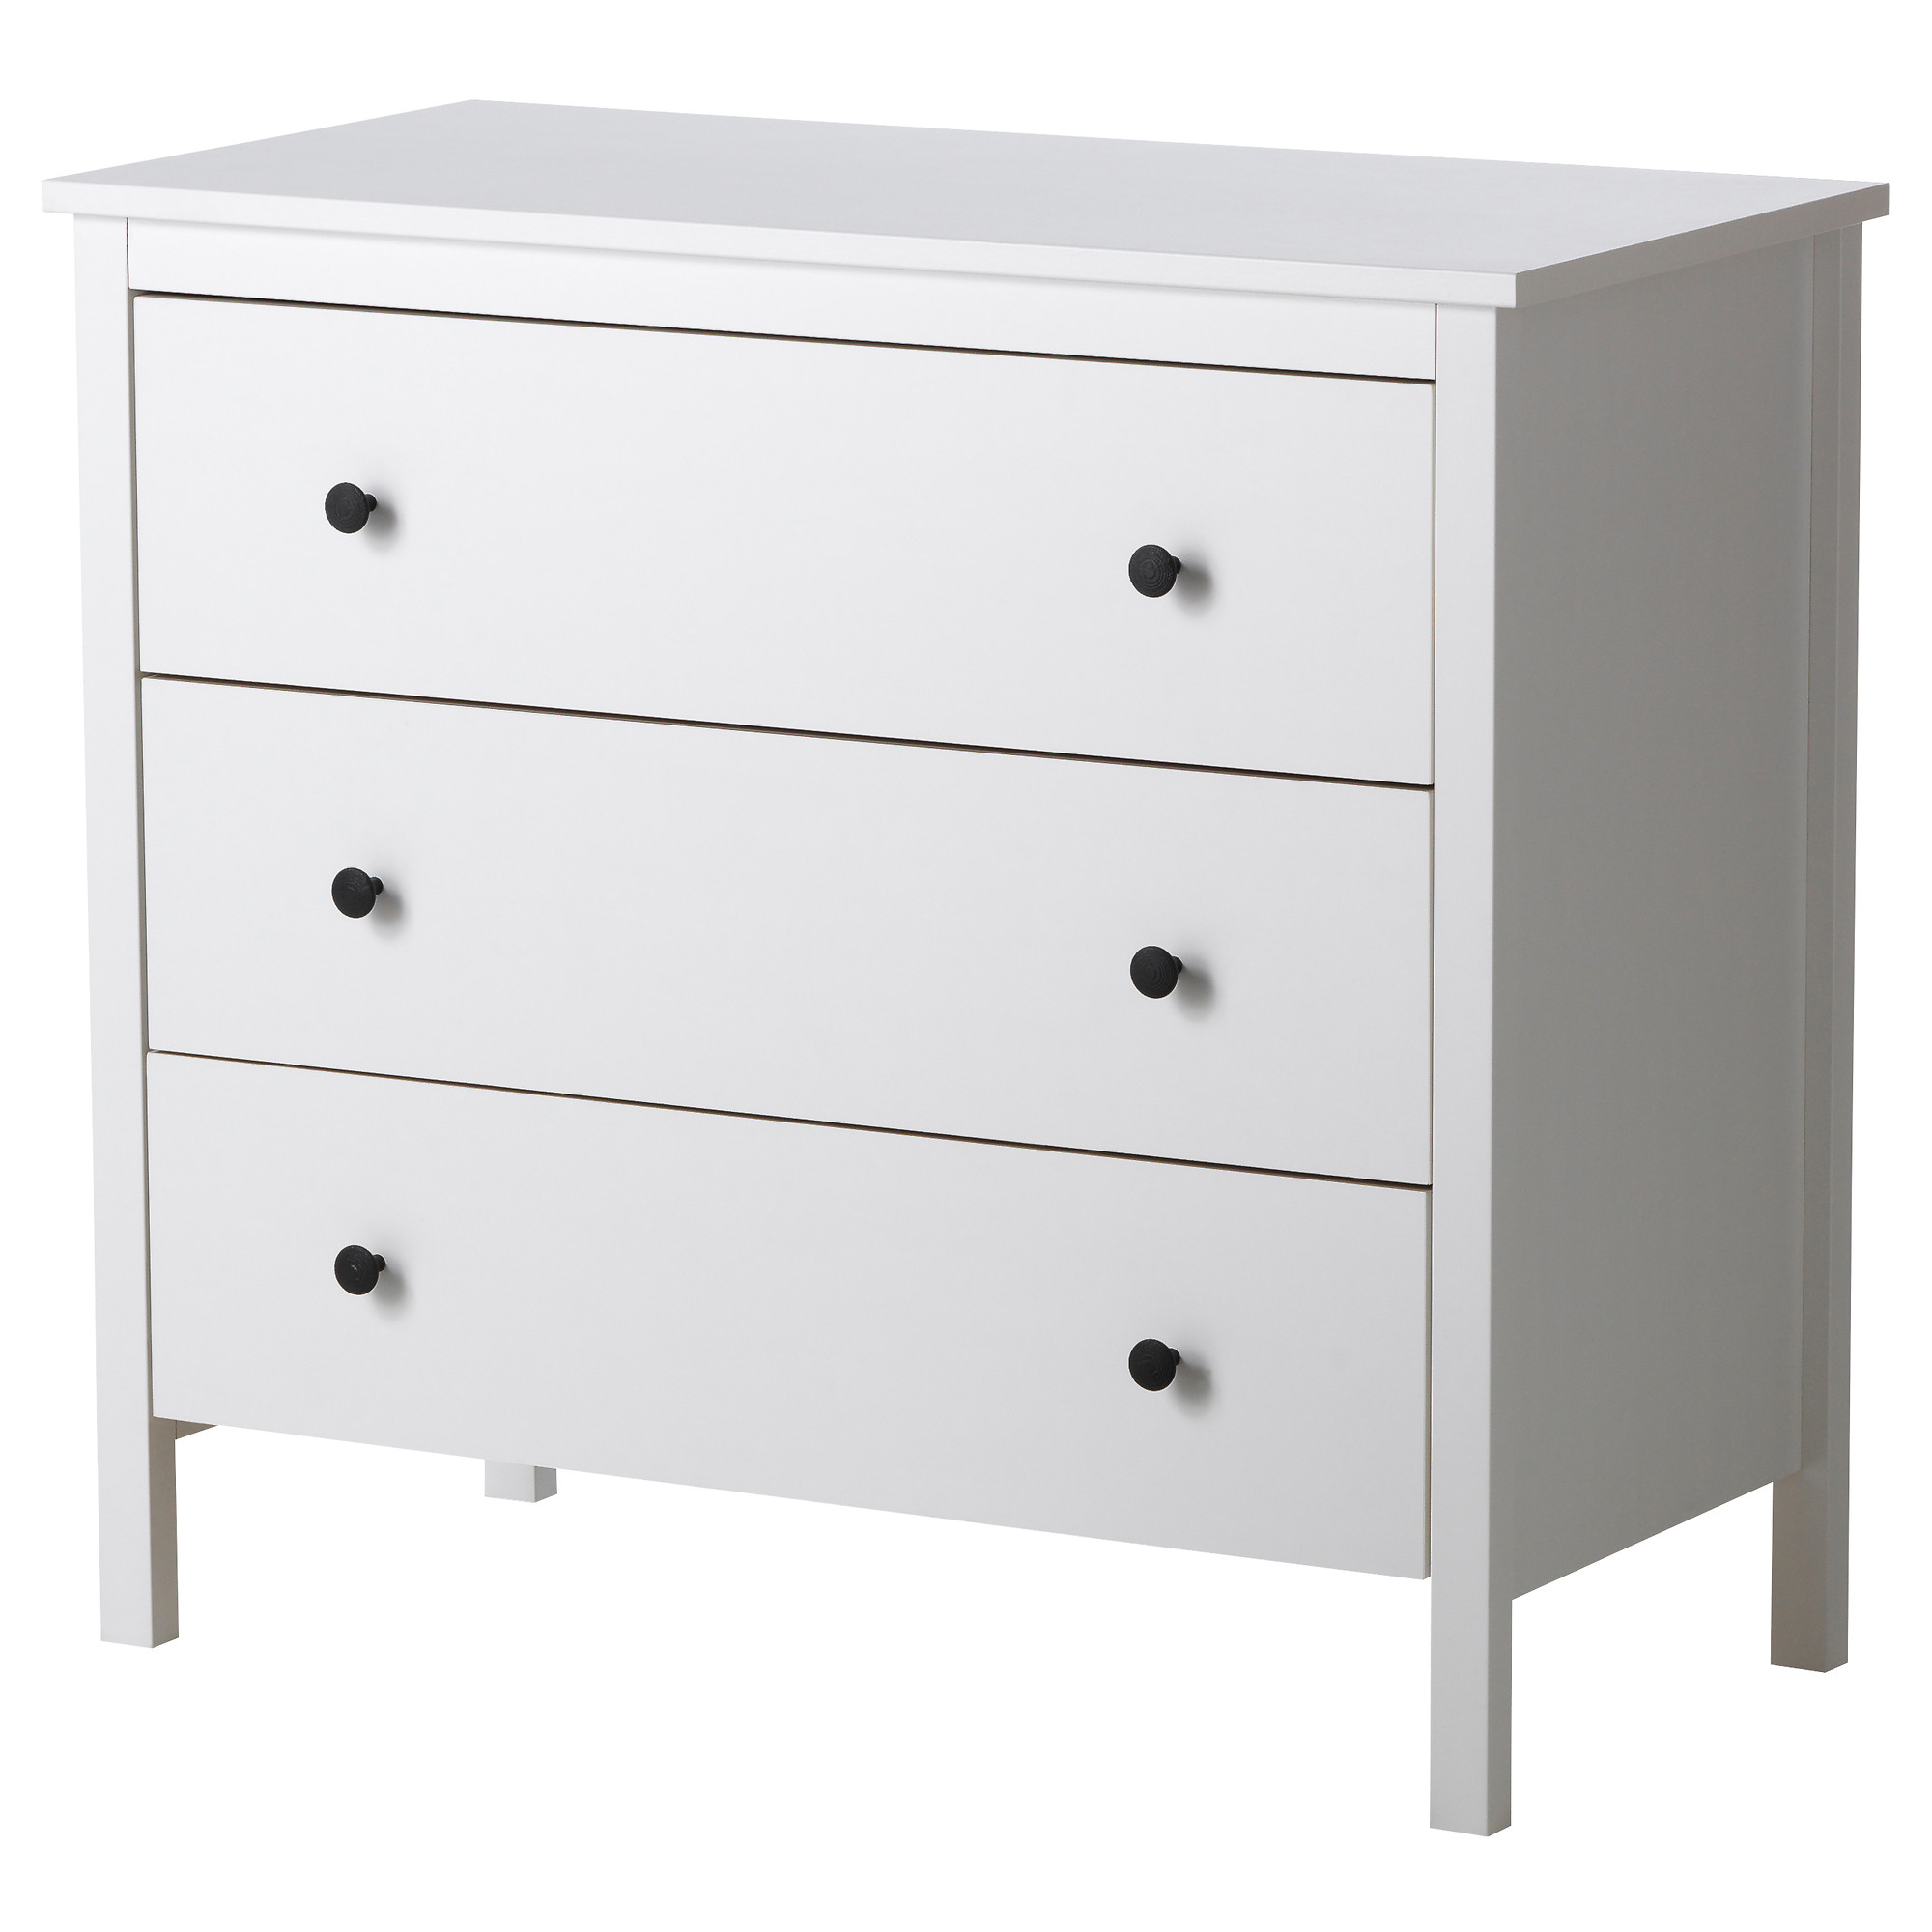 How To Remove Stains From Ikea Furniture, White Wooden Dresser Ikea